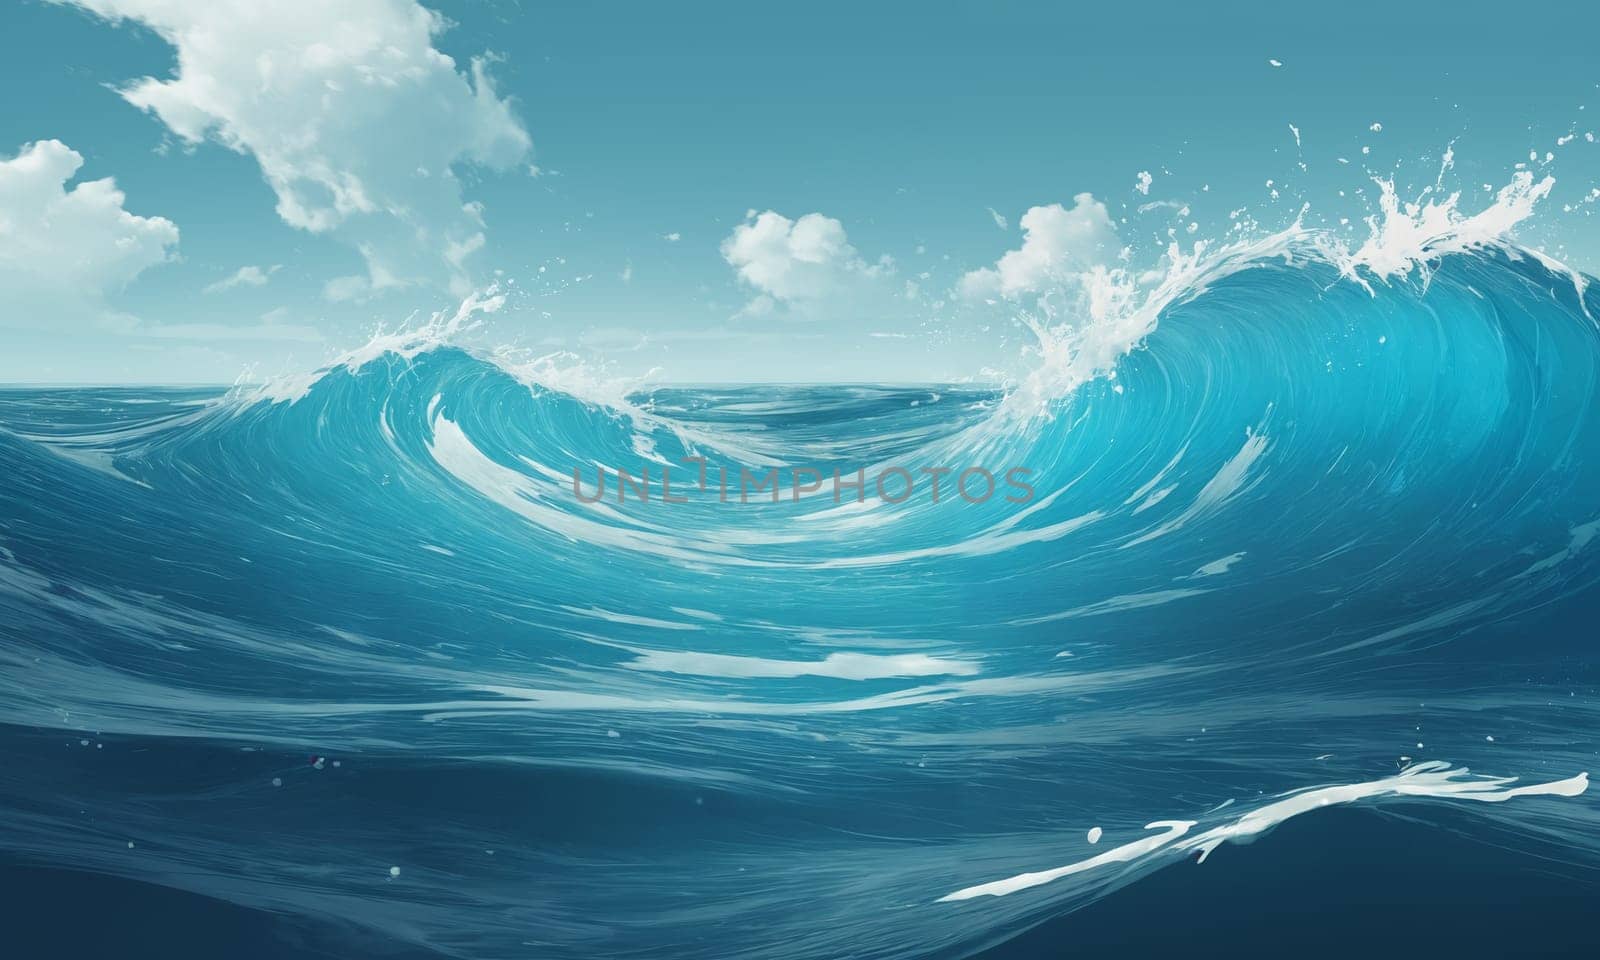 Blue ocean wave with white clouds and blue sky. illustration by Andre1ns